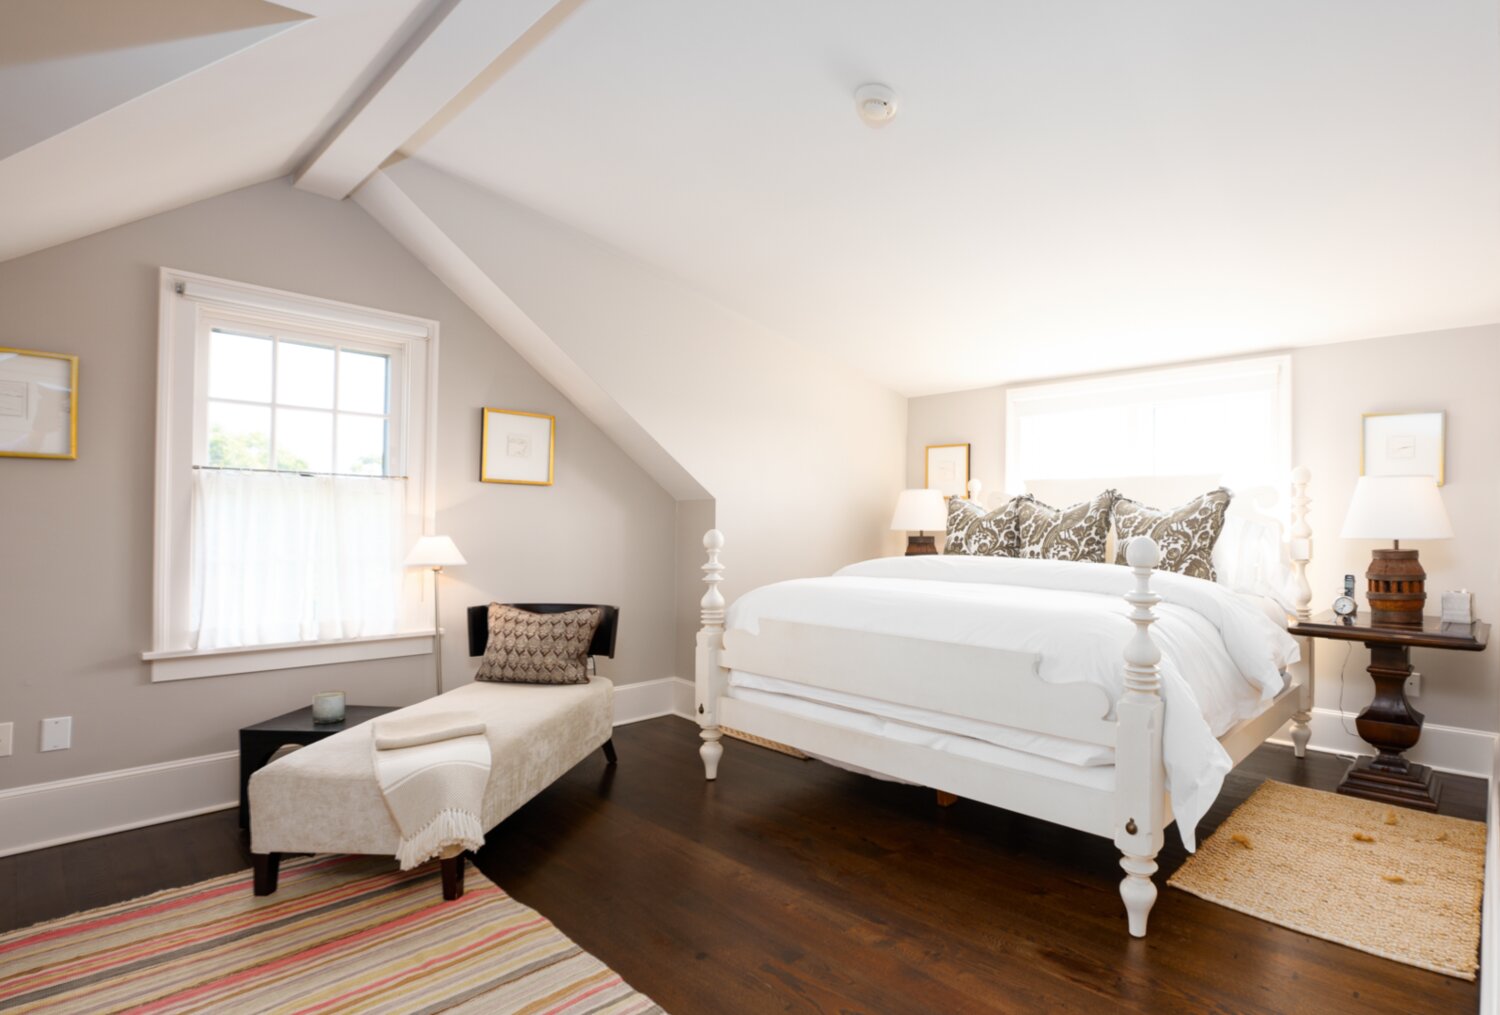 The east-facing bedroom suite has cathedral ceilings, a quaint reading nook and built-in cabinets.